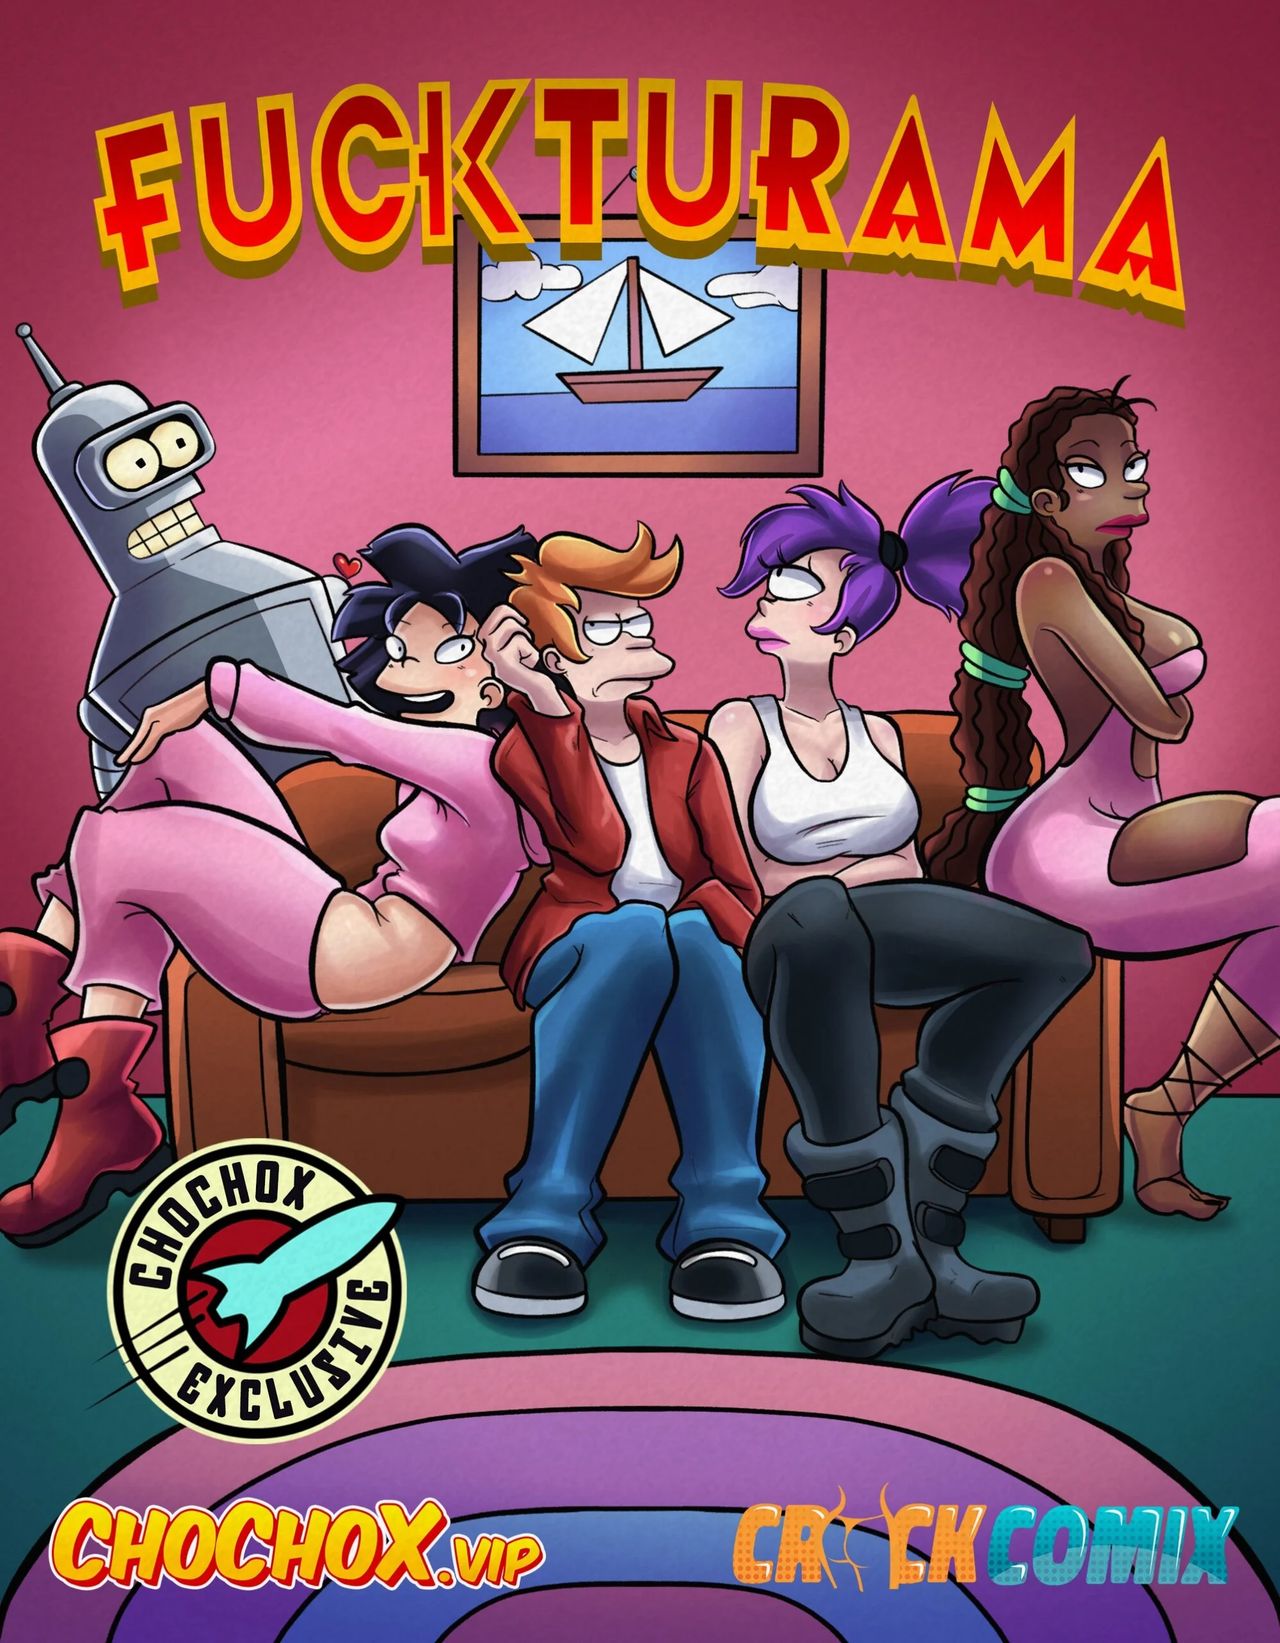 Fuckturama - The Simpsons by ChoChoX - Ongoing.